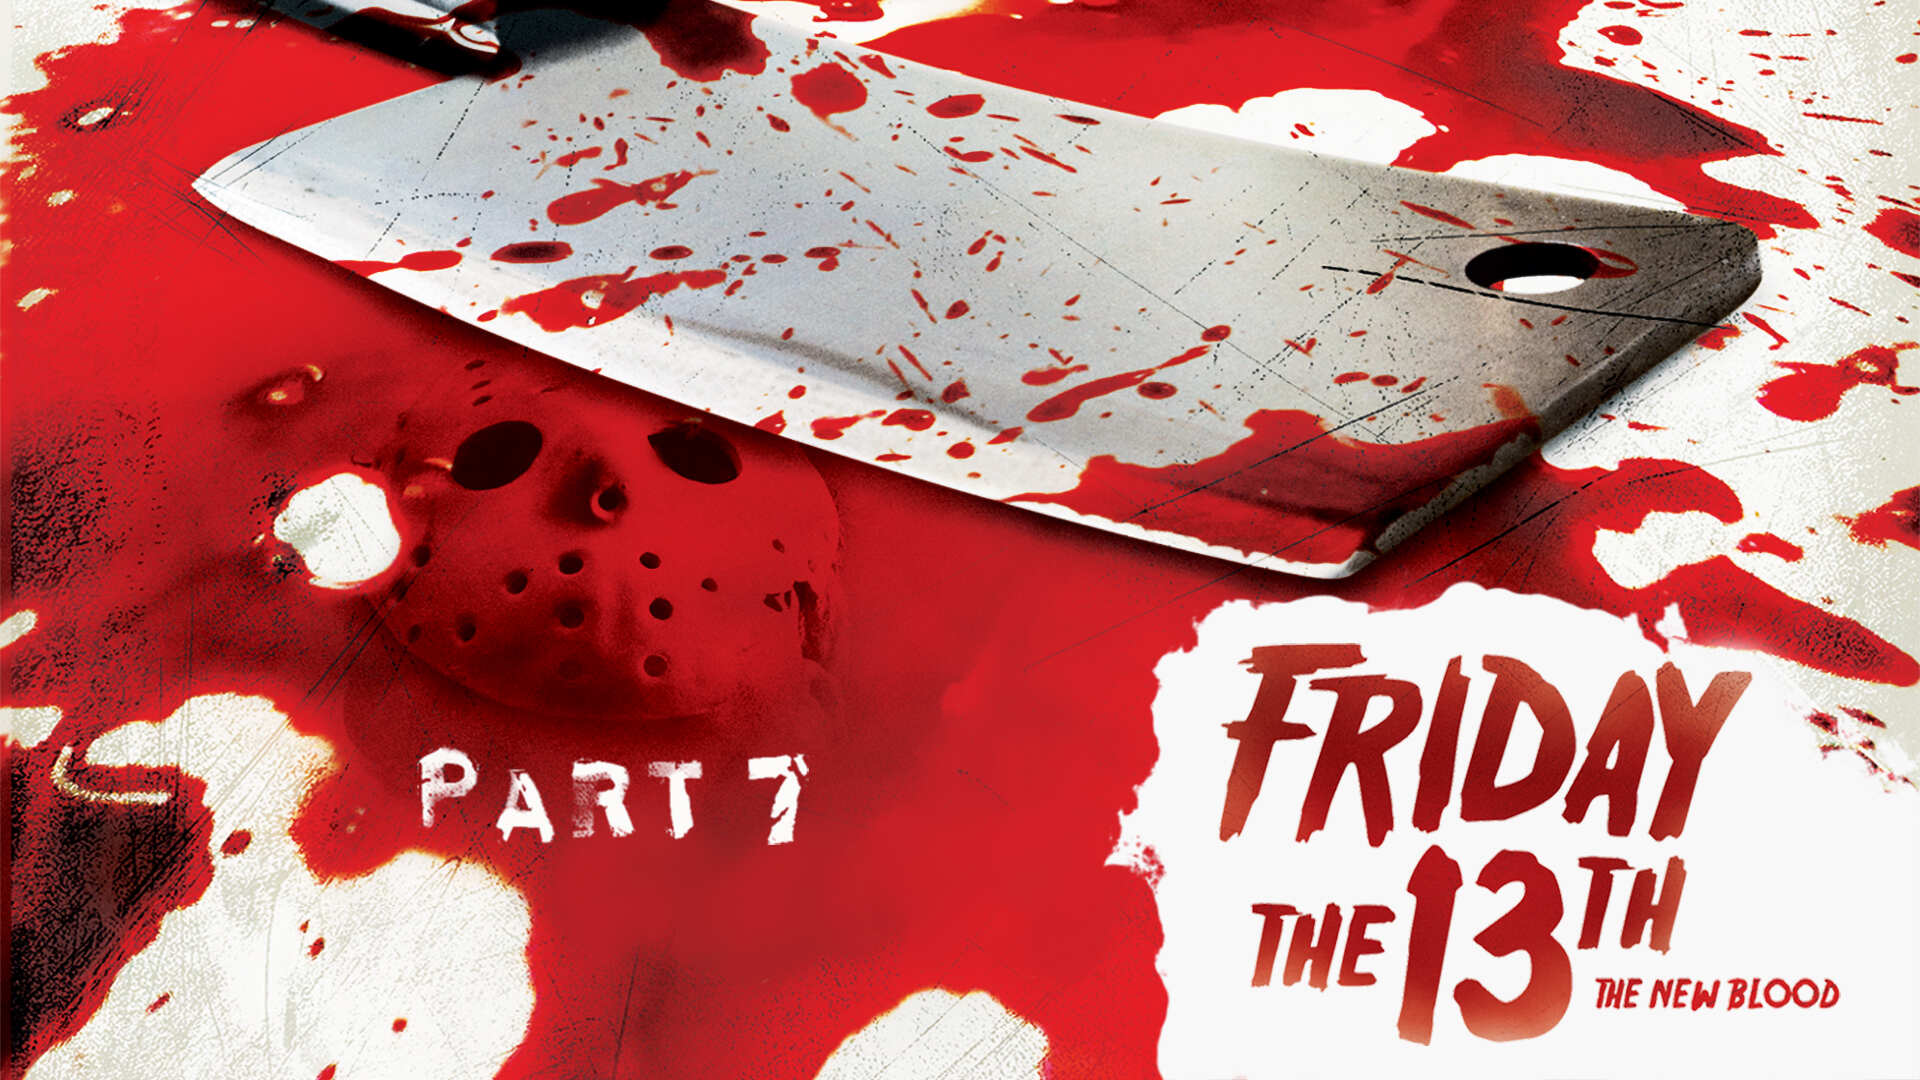 33-facts-about-the-movie-friday-the-13th-part-vii-the-new-blood